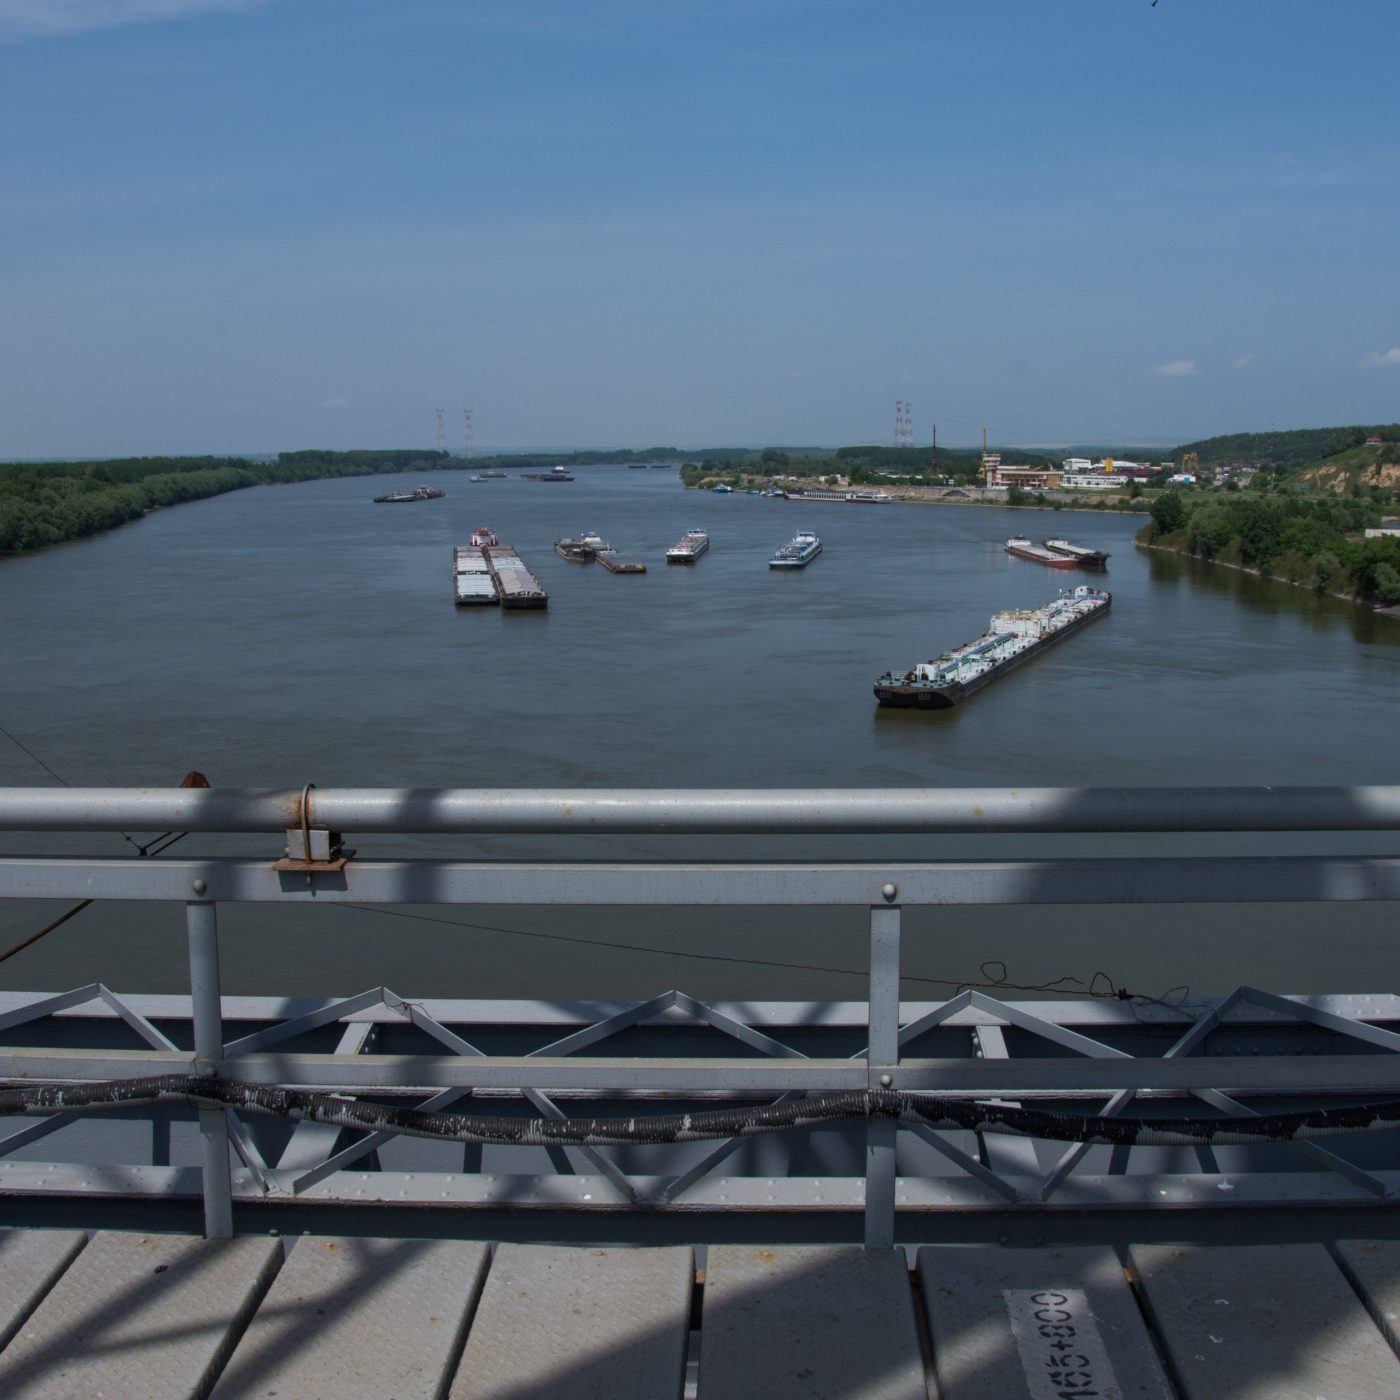 view  from The Anghel Saligny Bridge,
ships, barges on the Danube,Cernavoda, Romania. may , 2017